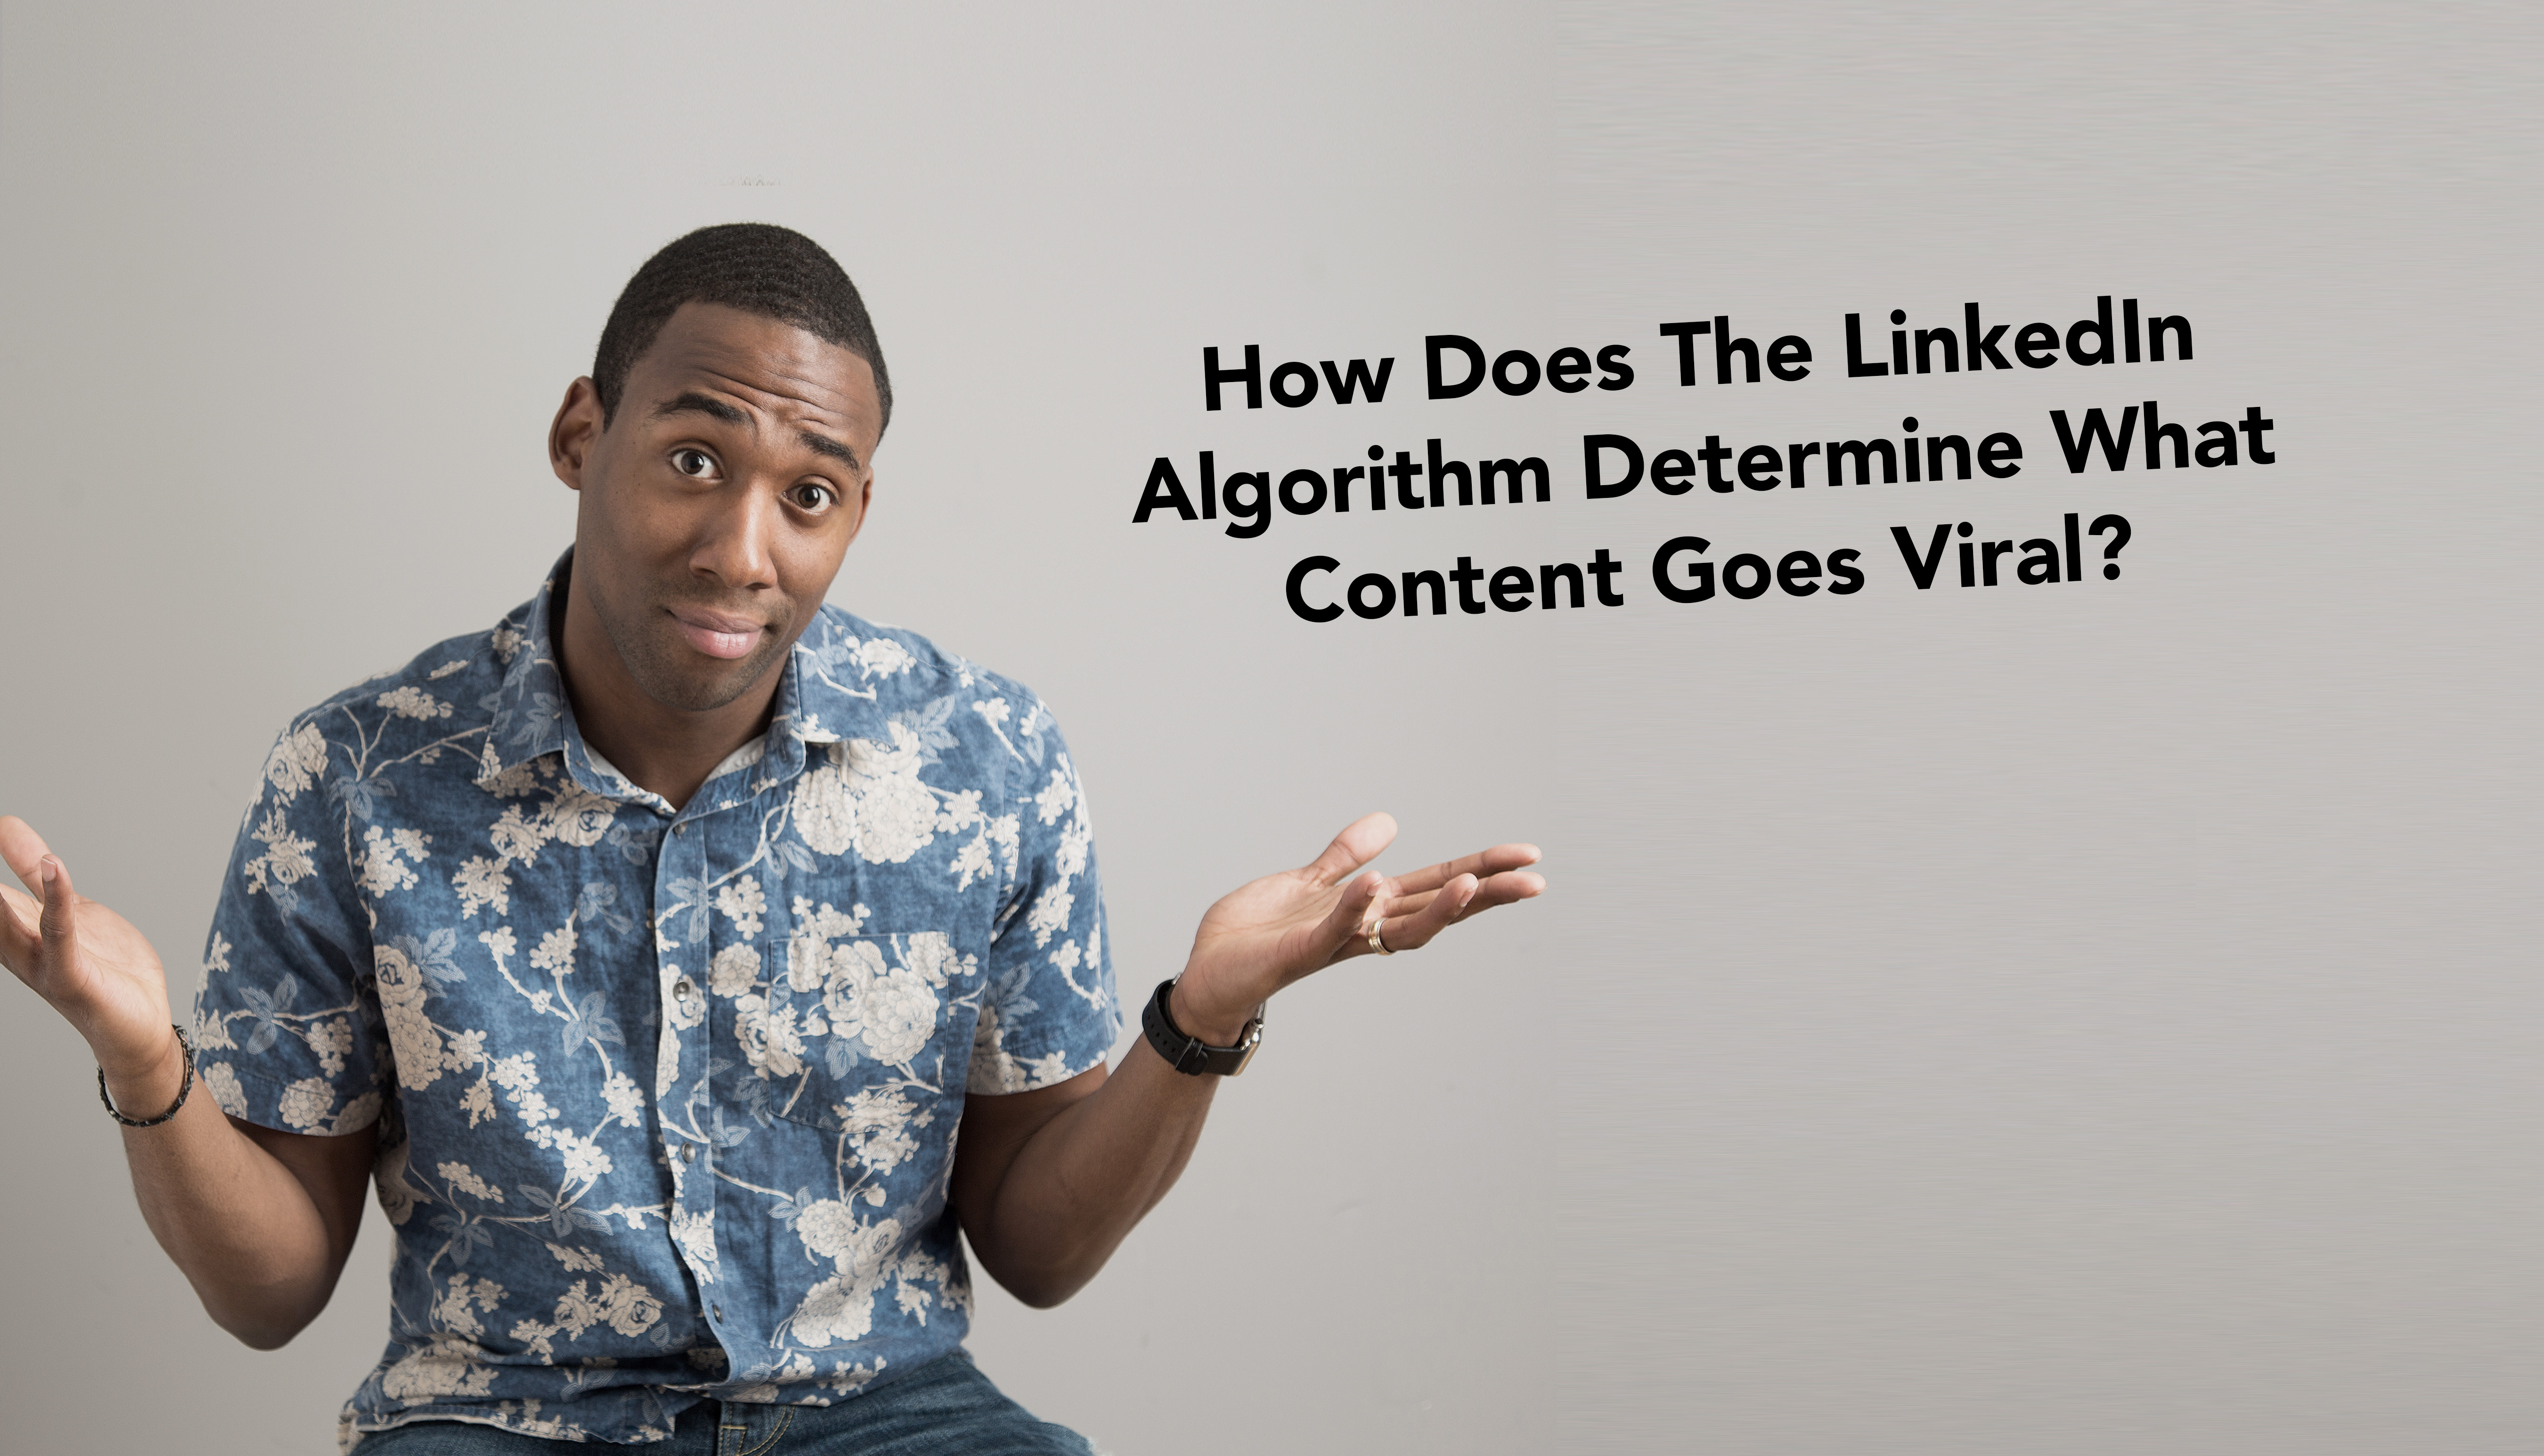 How Does The LinkedIn Algorithm Determine What Goes Viral?